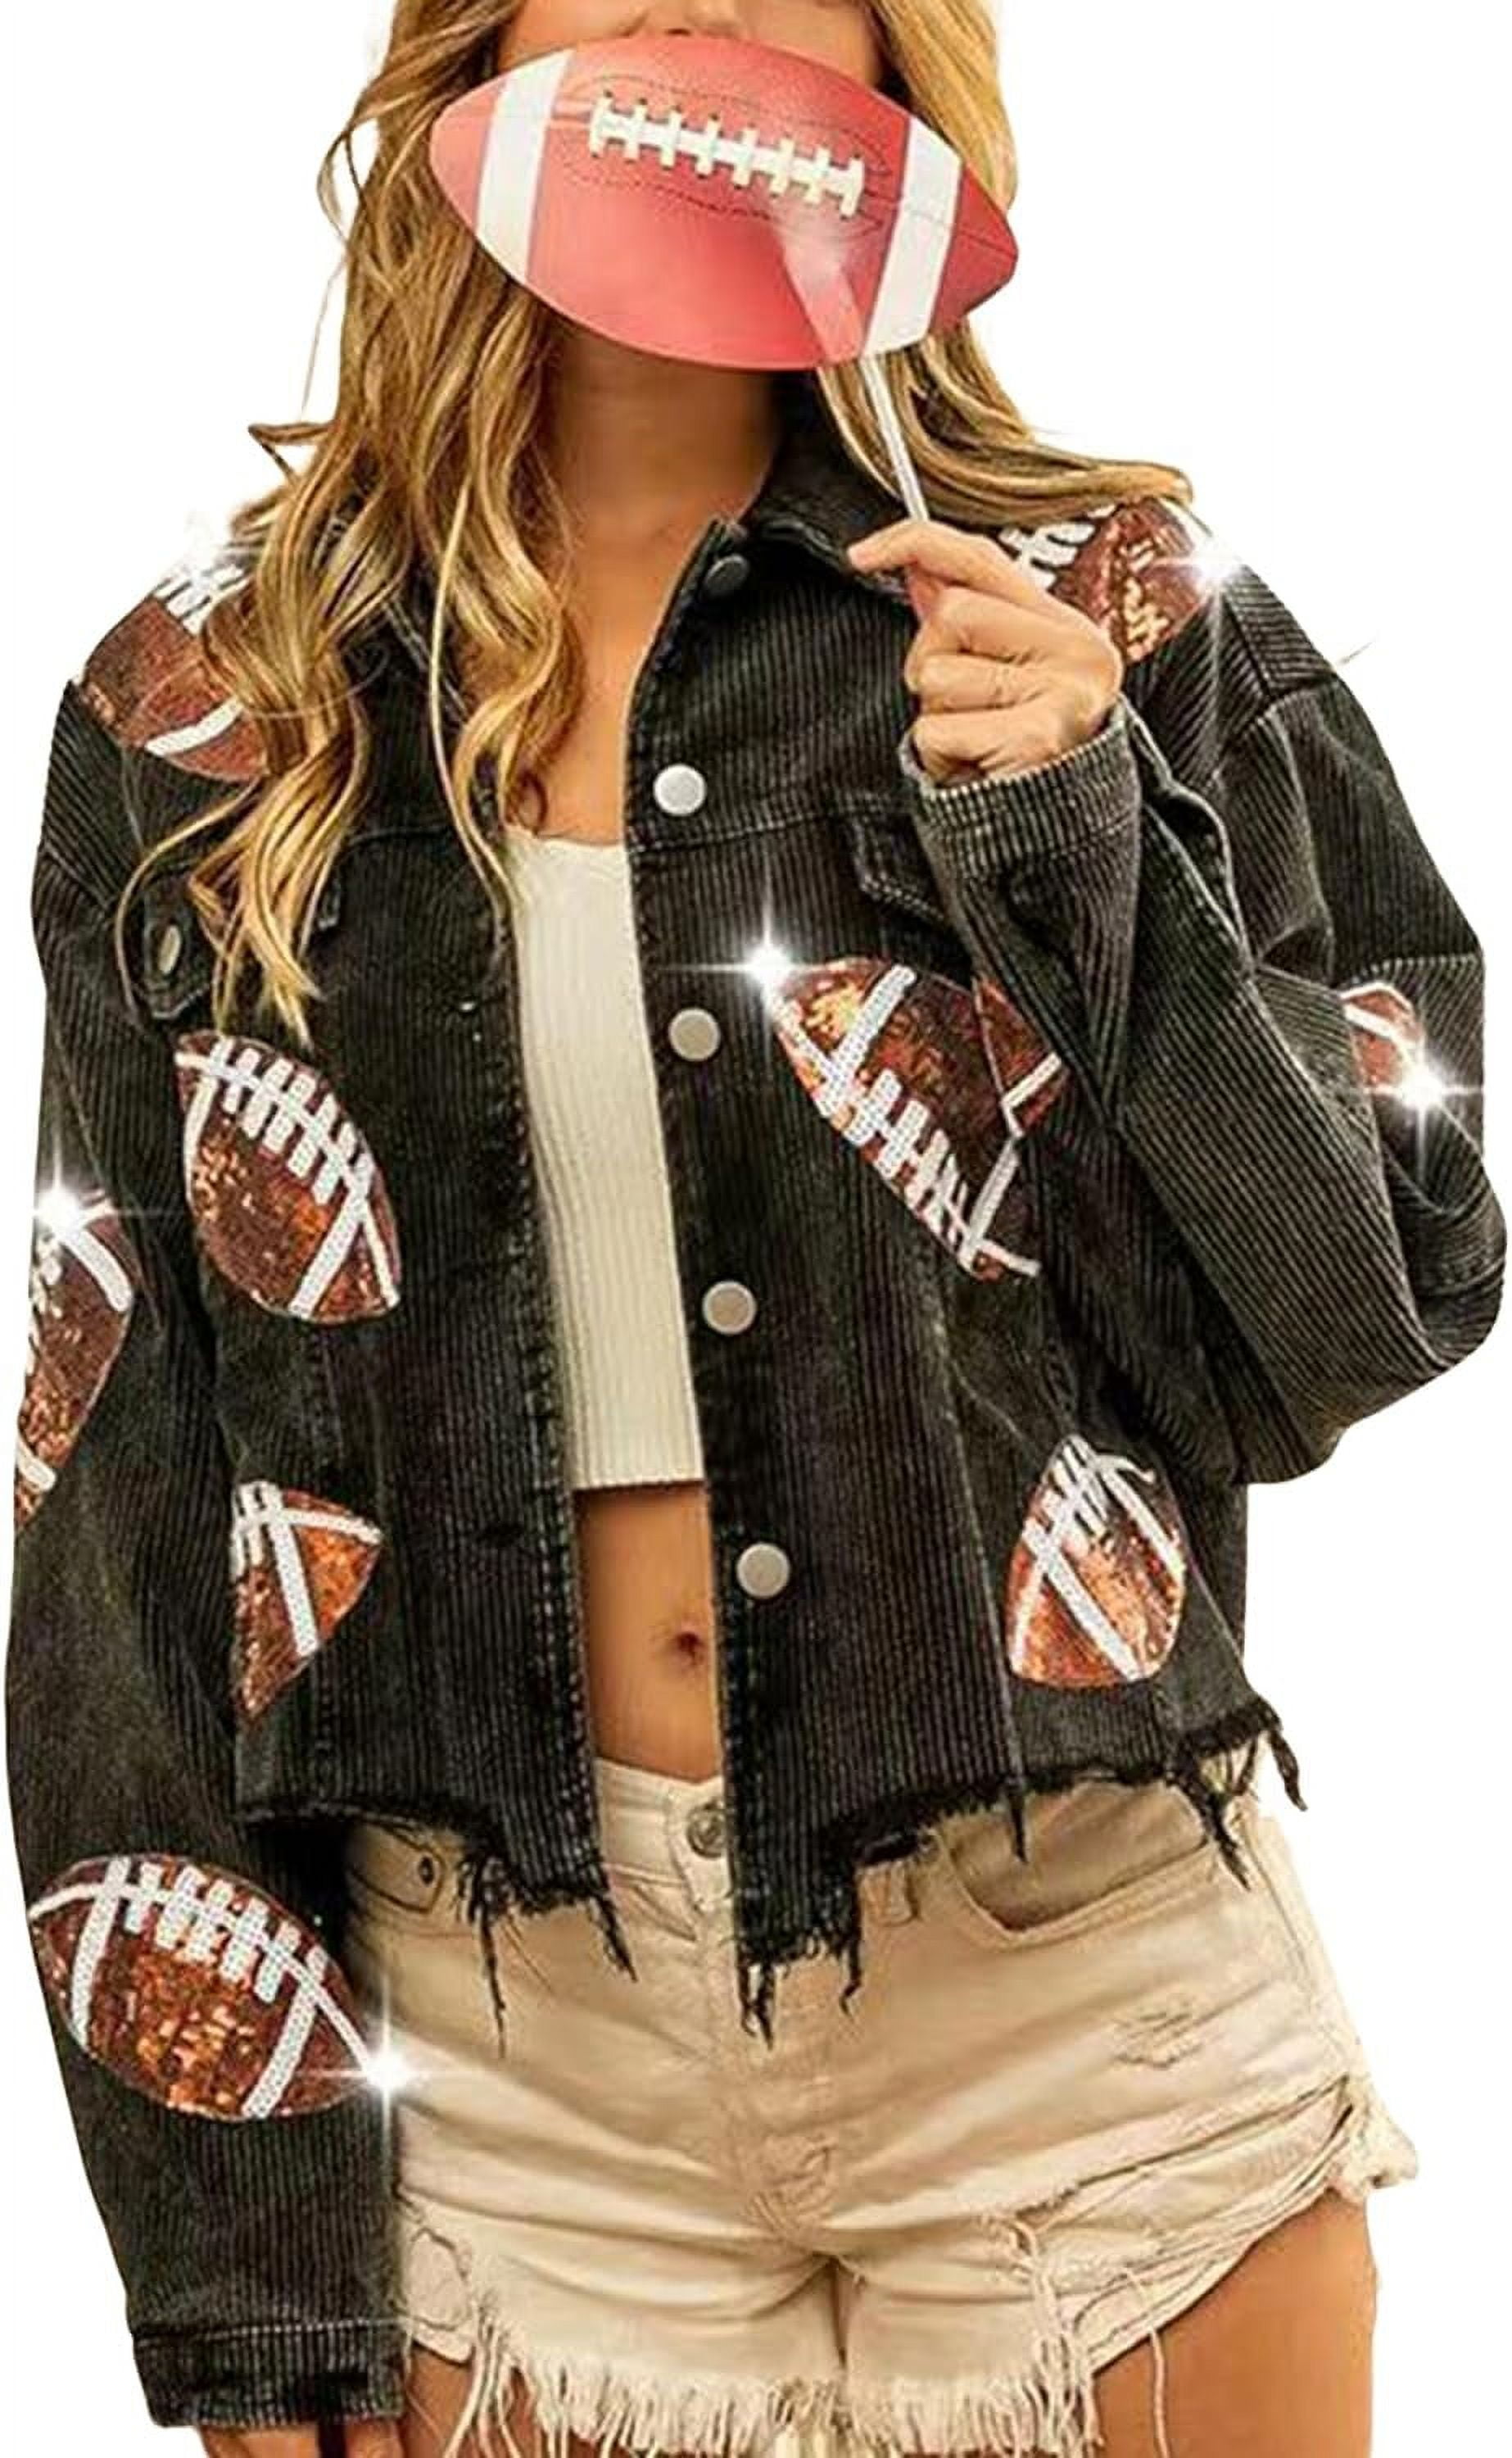 SOMER Women's Cropped Corduroy Rugby American Football Jacket Sequin  Patched Short Button Raw Hem Jacket Coat